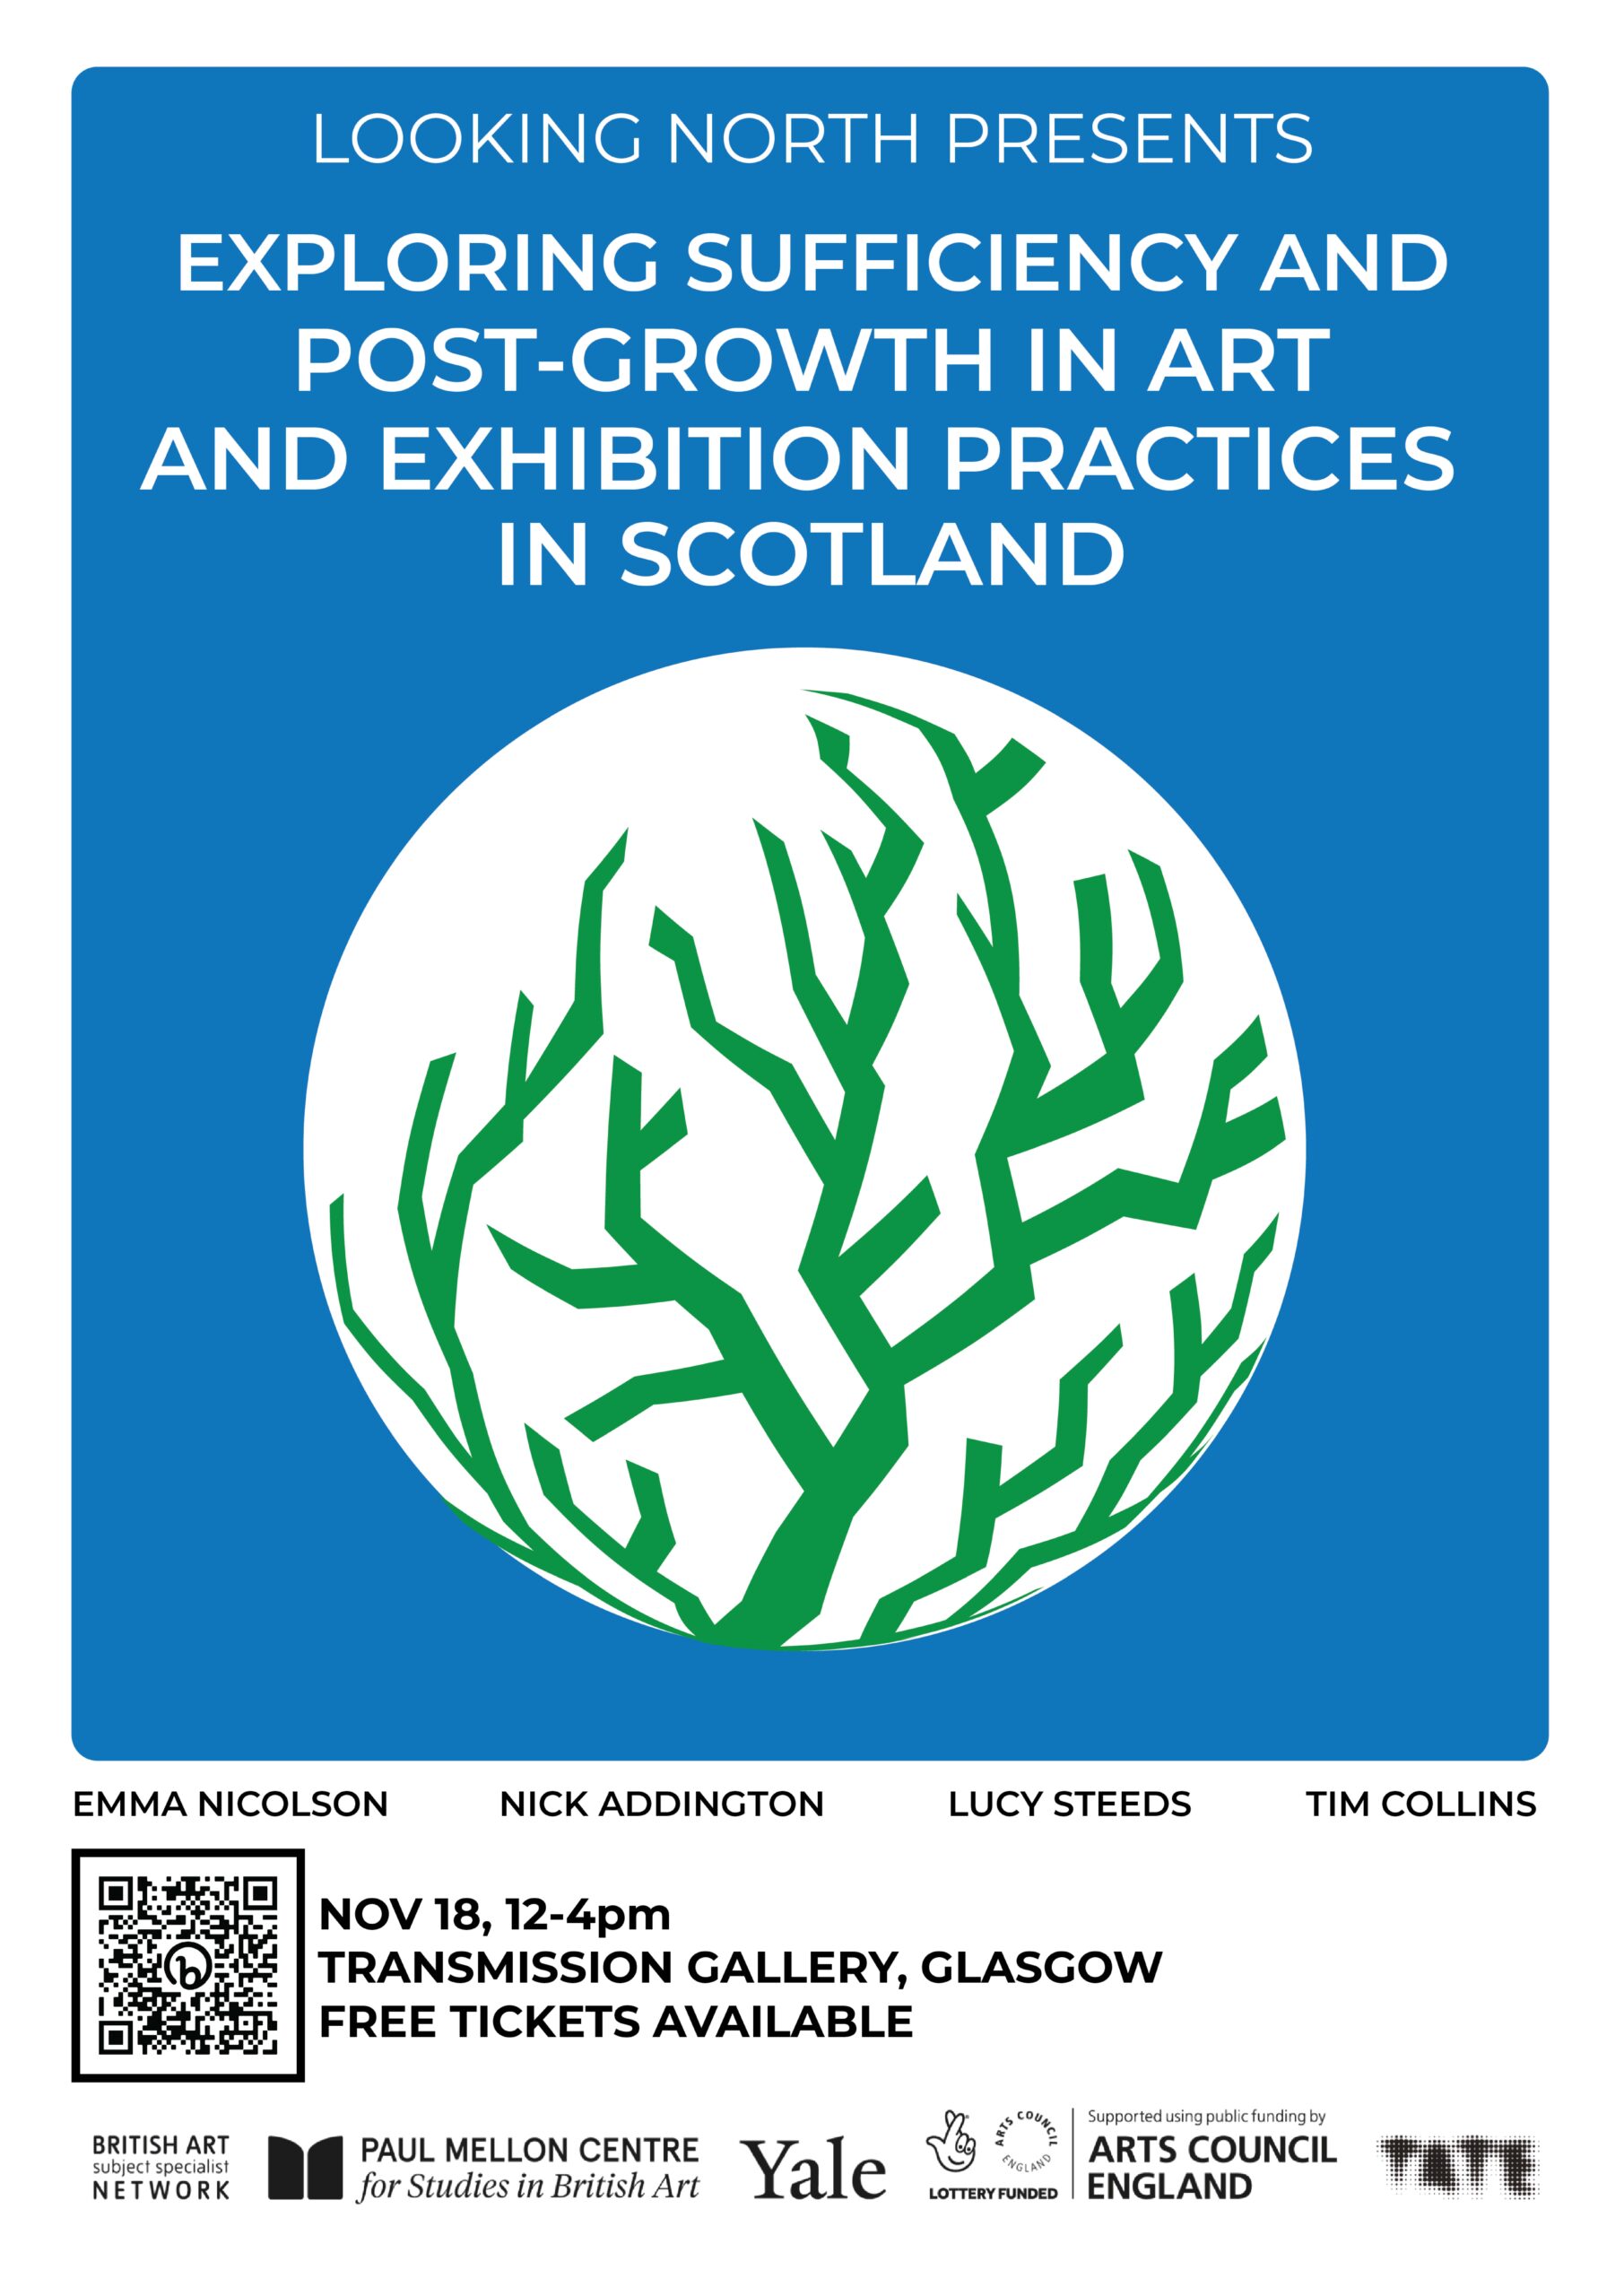 Looking North Presents: Exploring Post-Growth and Sufficiency in Art & Exhibition Practices in Scotland